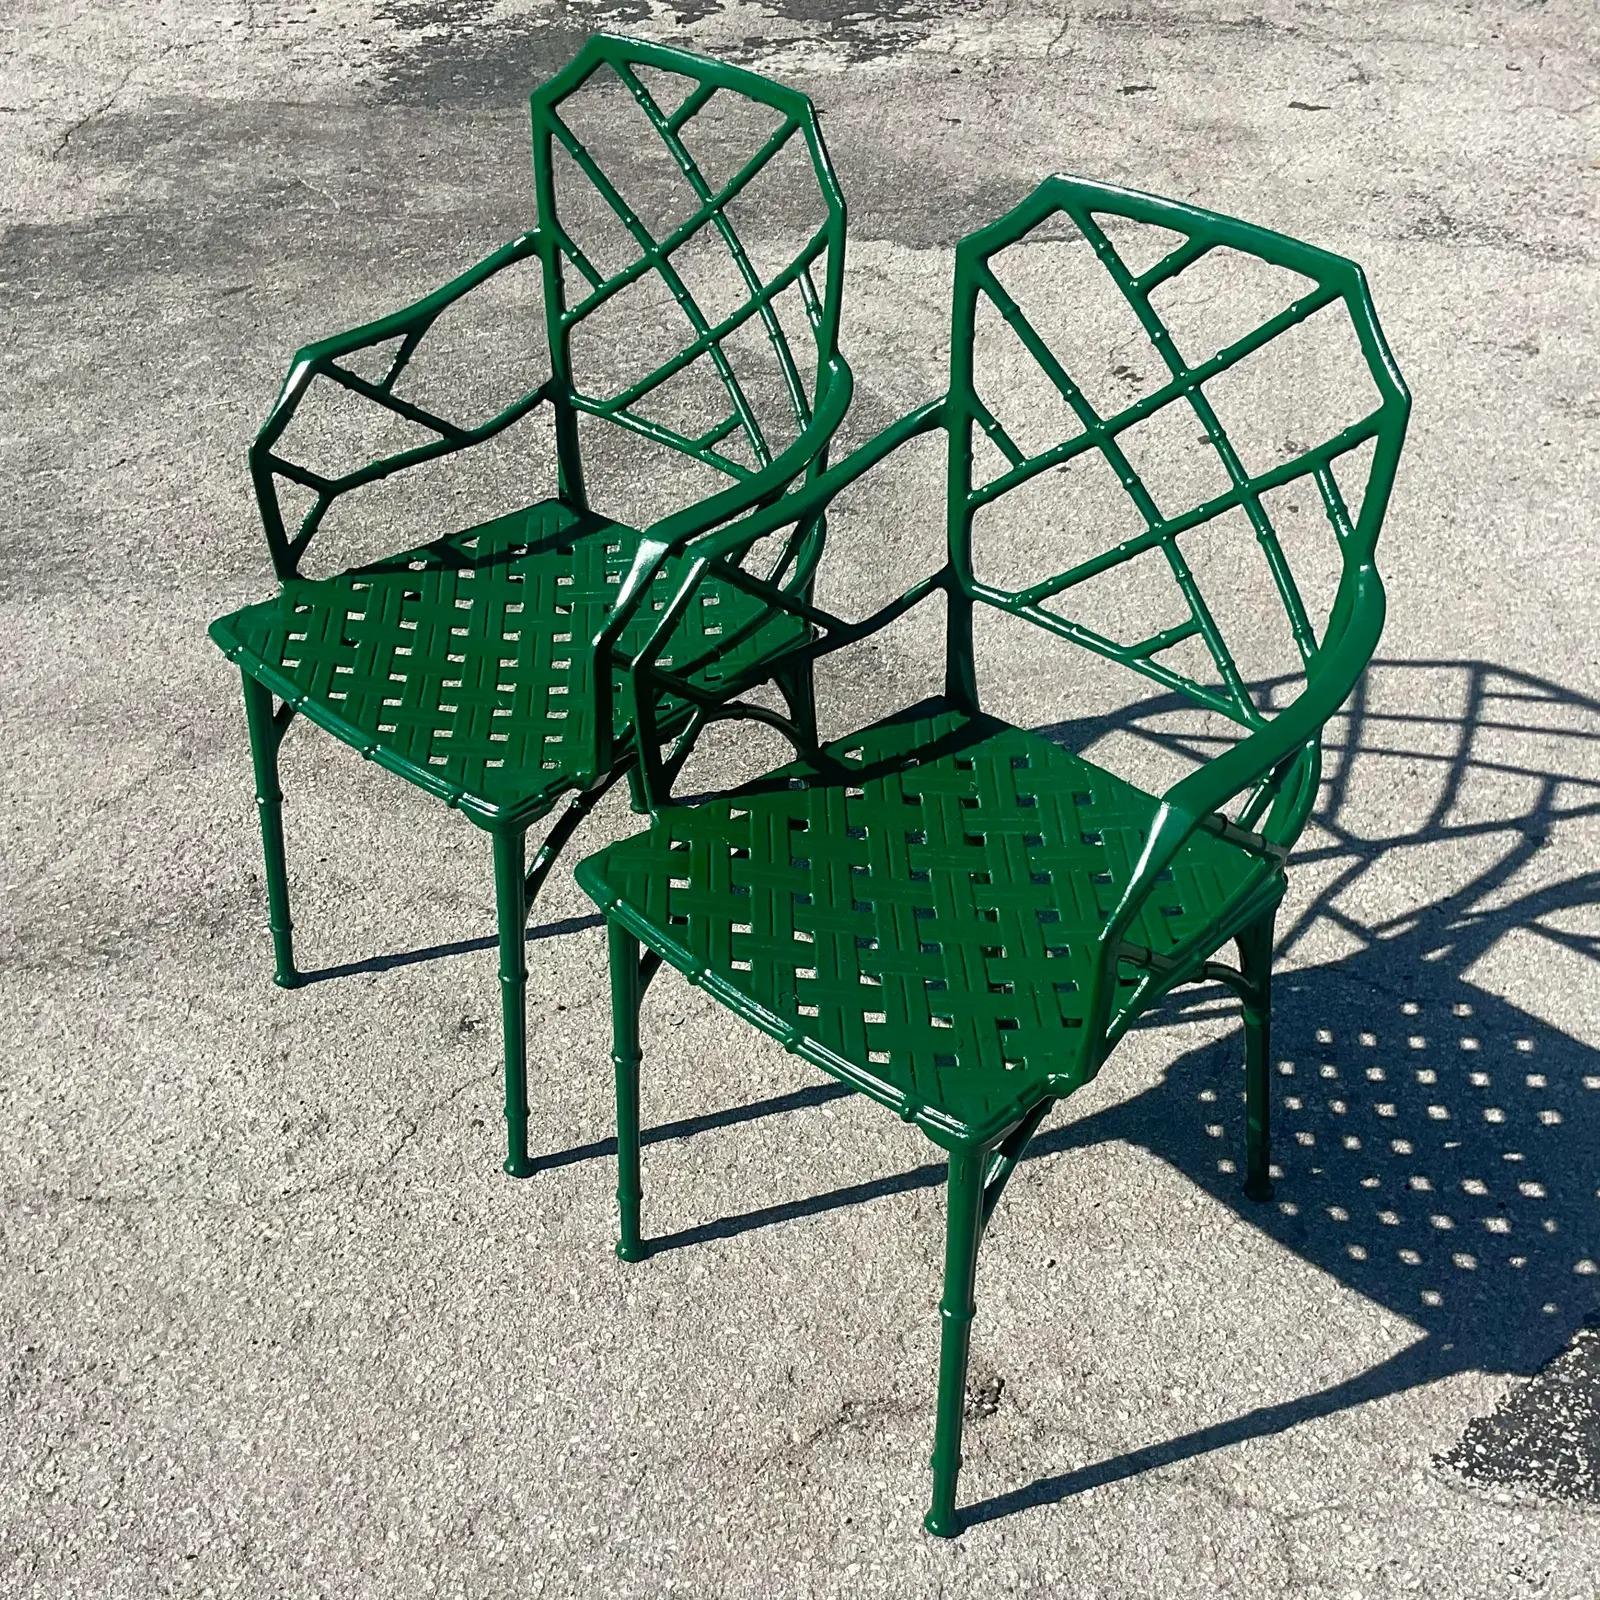 A fabulous pair of vintage Coastal outdoor arm chairs. The “Calcutta” design from the iconic Brown Jordan. A chic Chinese Chippendale design in cast aluminum in a Kelly green gloss finish. Easily changed to suit your project. Unmarked. Acquired from